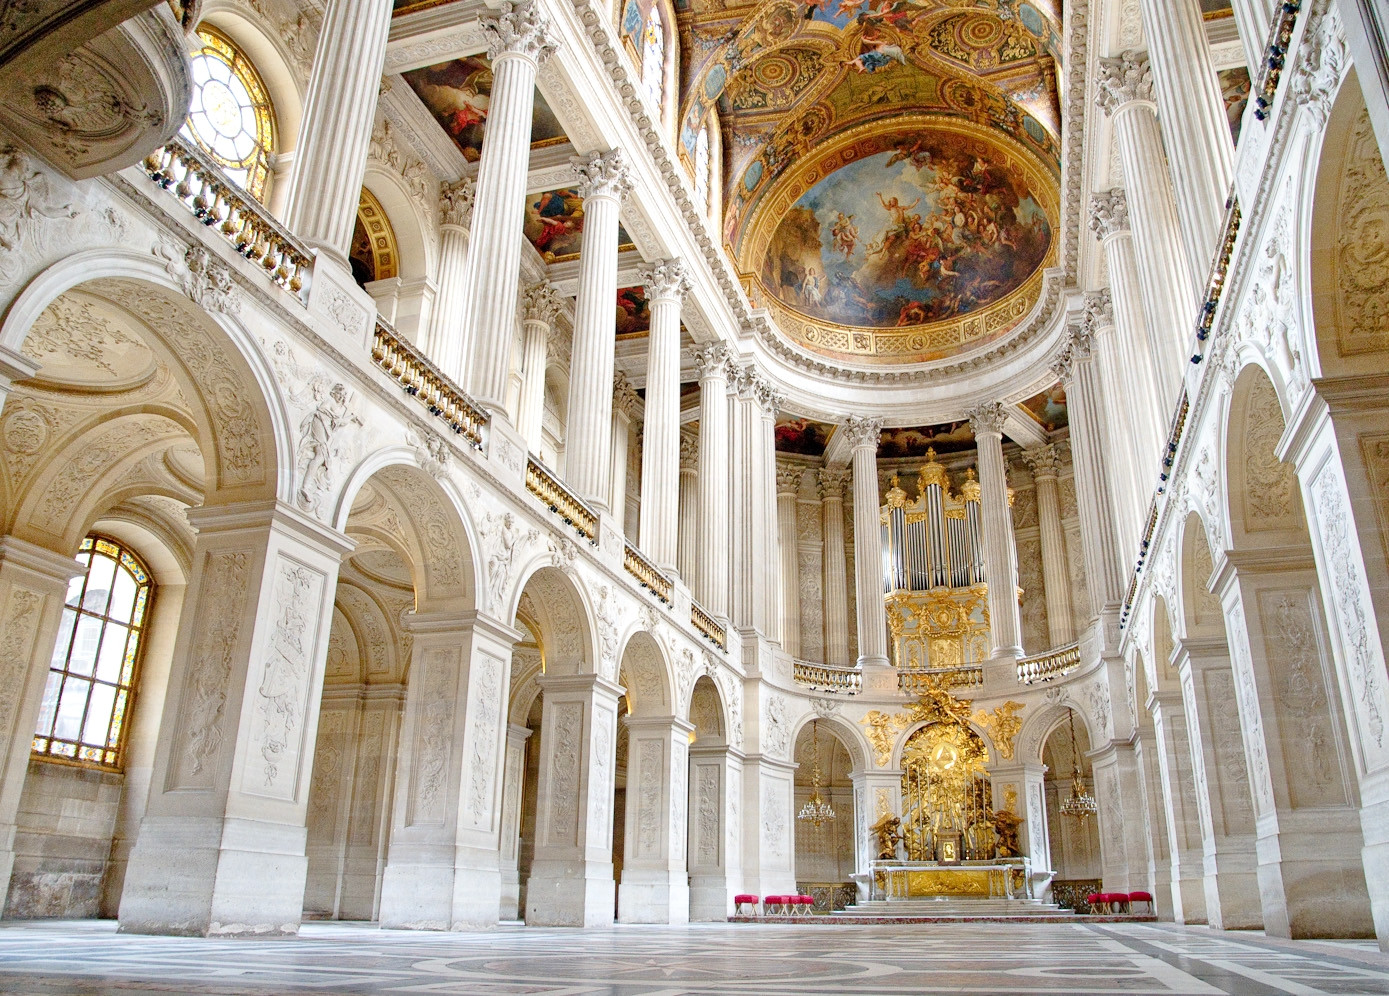 Chapel in Palace of versailles. Credit Thibault Chappe